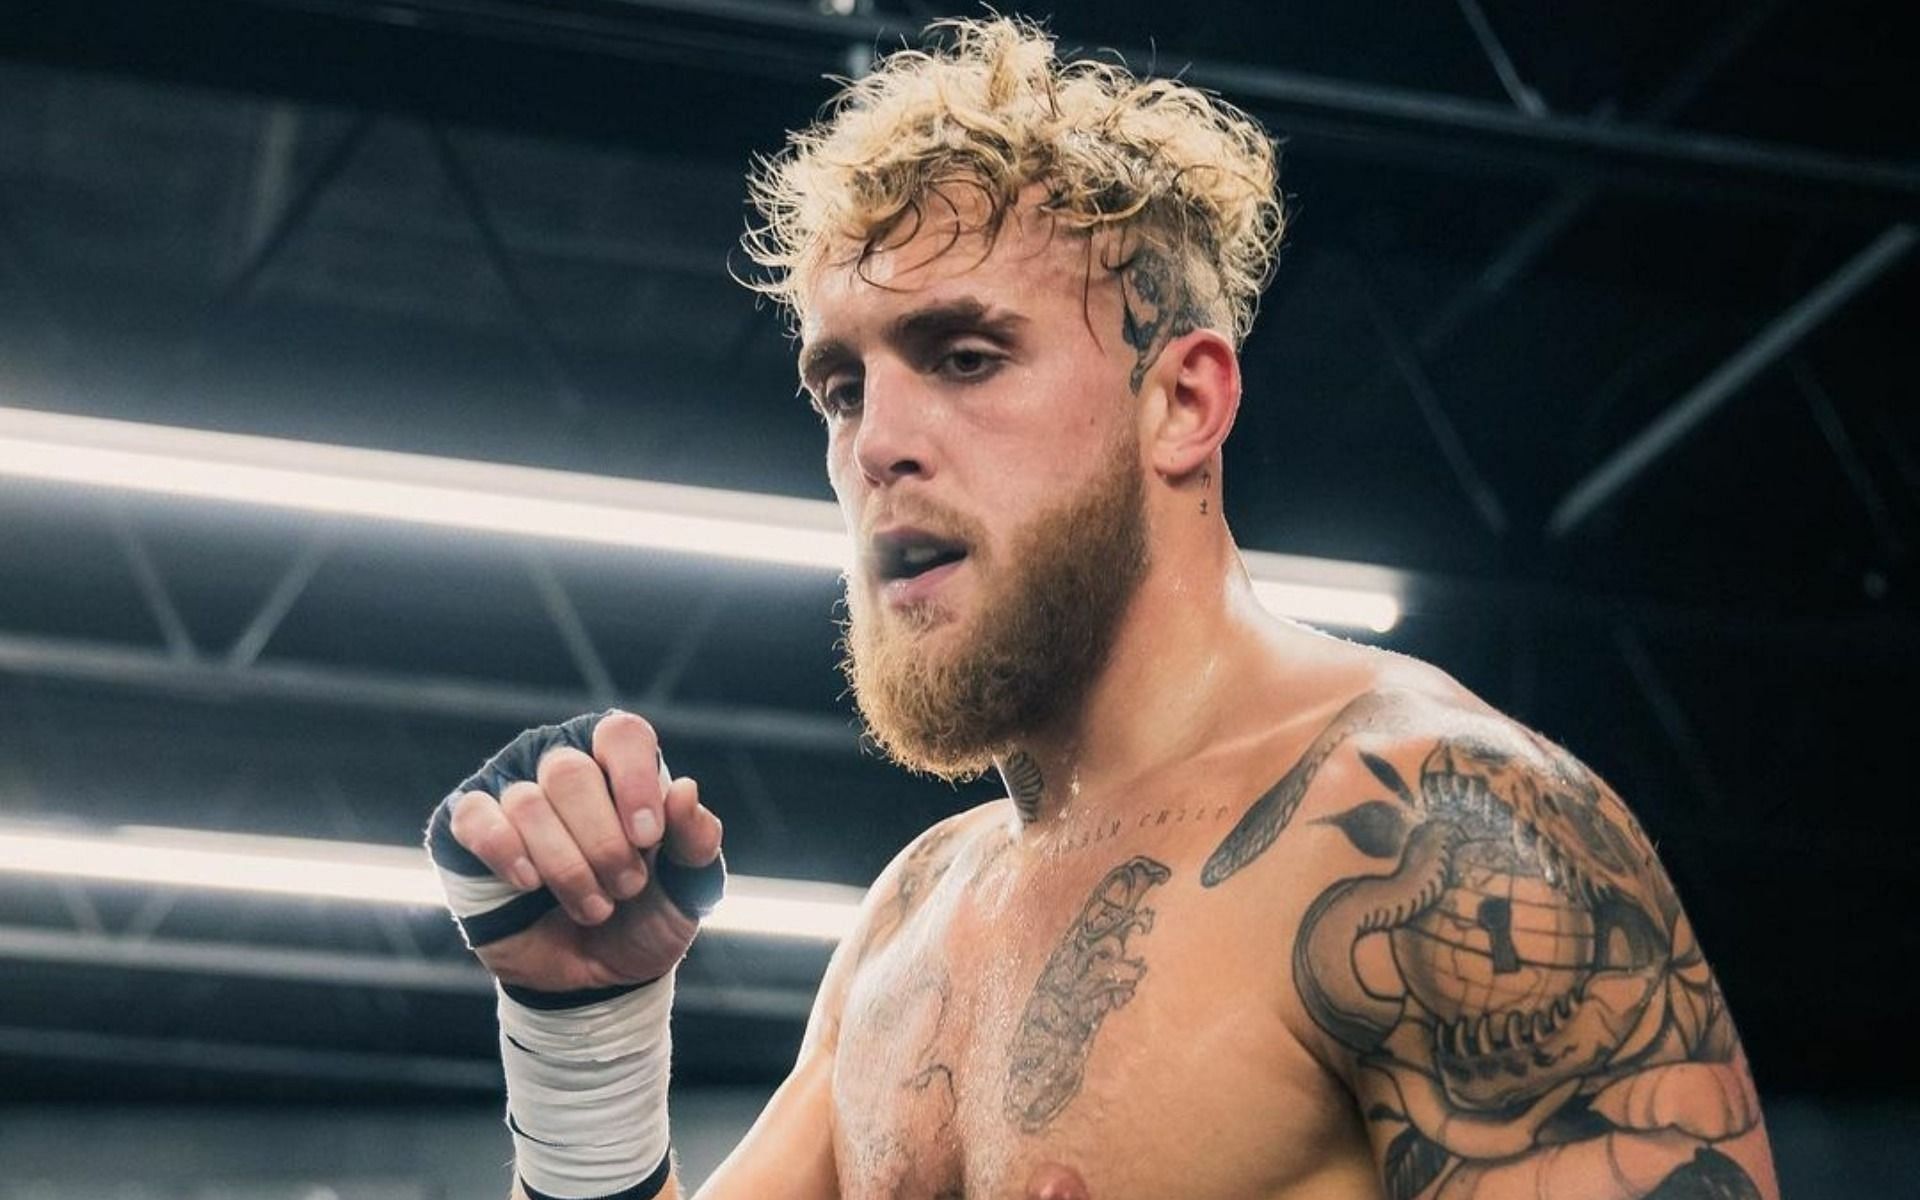 YouTuber-turned-boxer Jake Paul reacts during a training session (Image Credit: @jakepaul on Instagram)